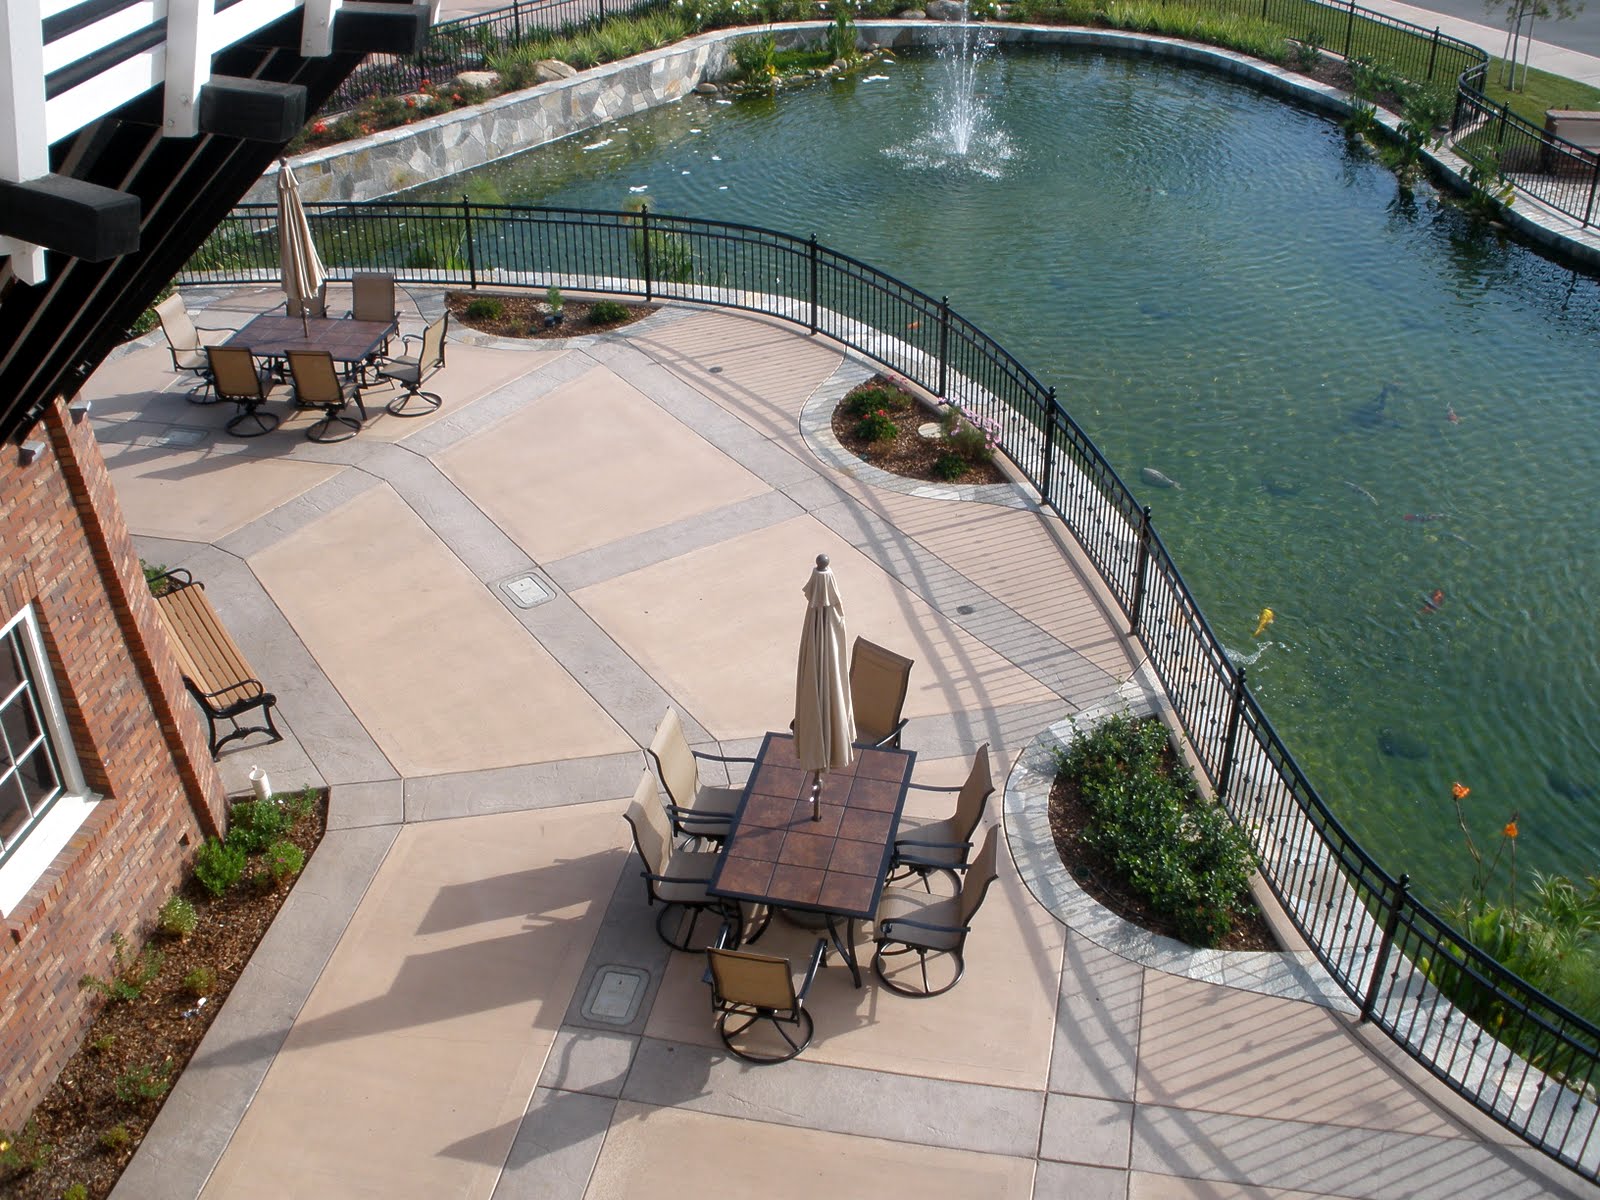 Meadowbrook Village Christian Retirement Community - This concrete patio area was integrally colored with Davis Colors' Padre Brown with a Walnut release agent and Meadowbrook Brown (custom color).